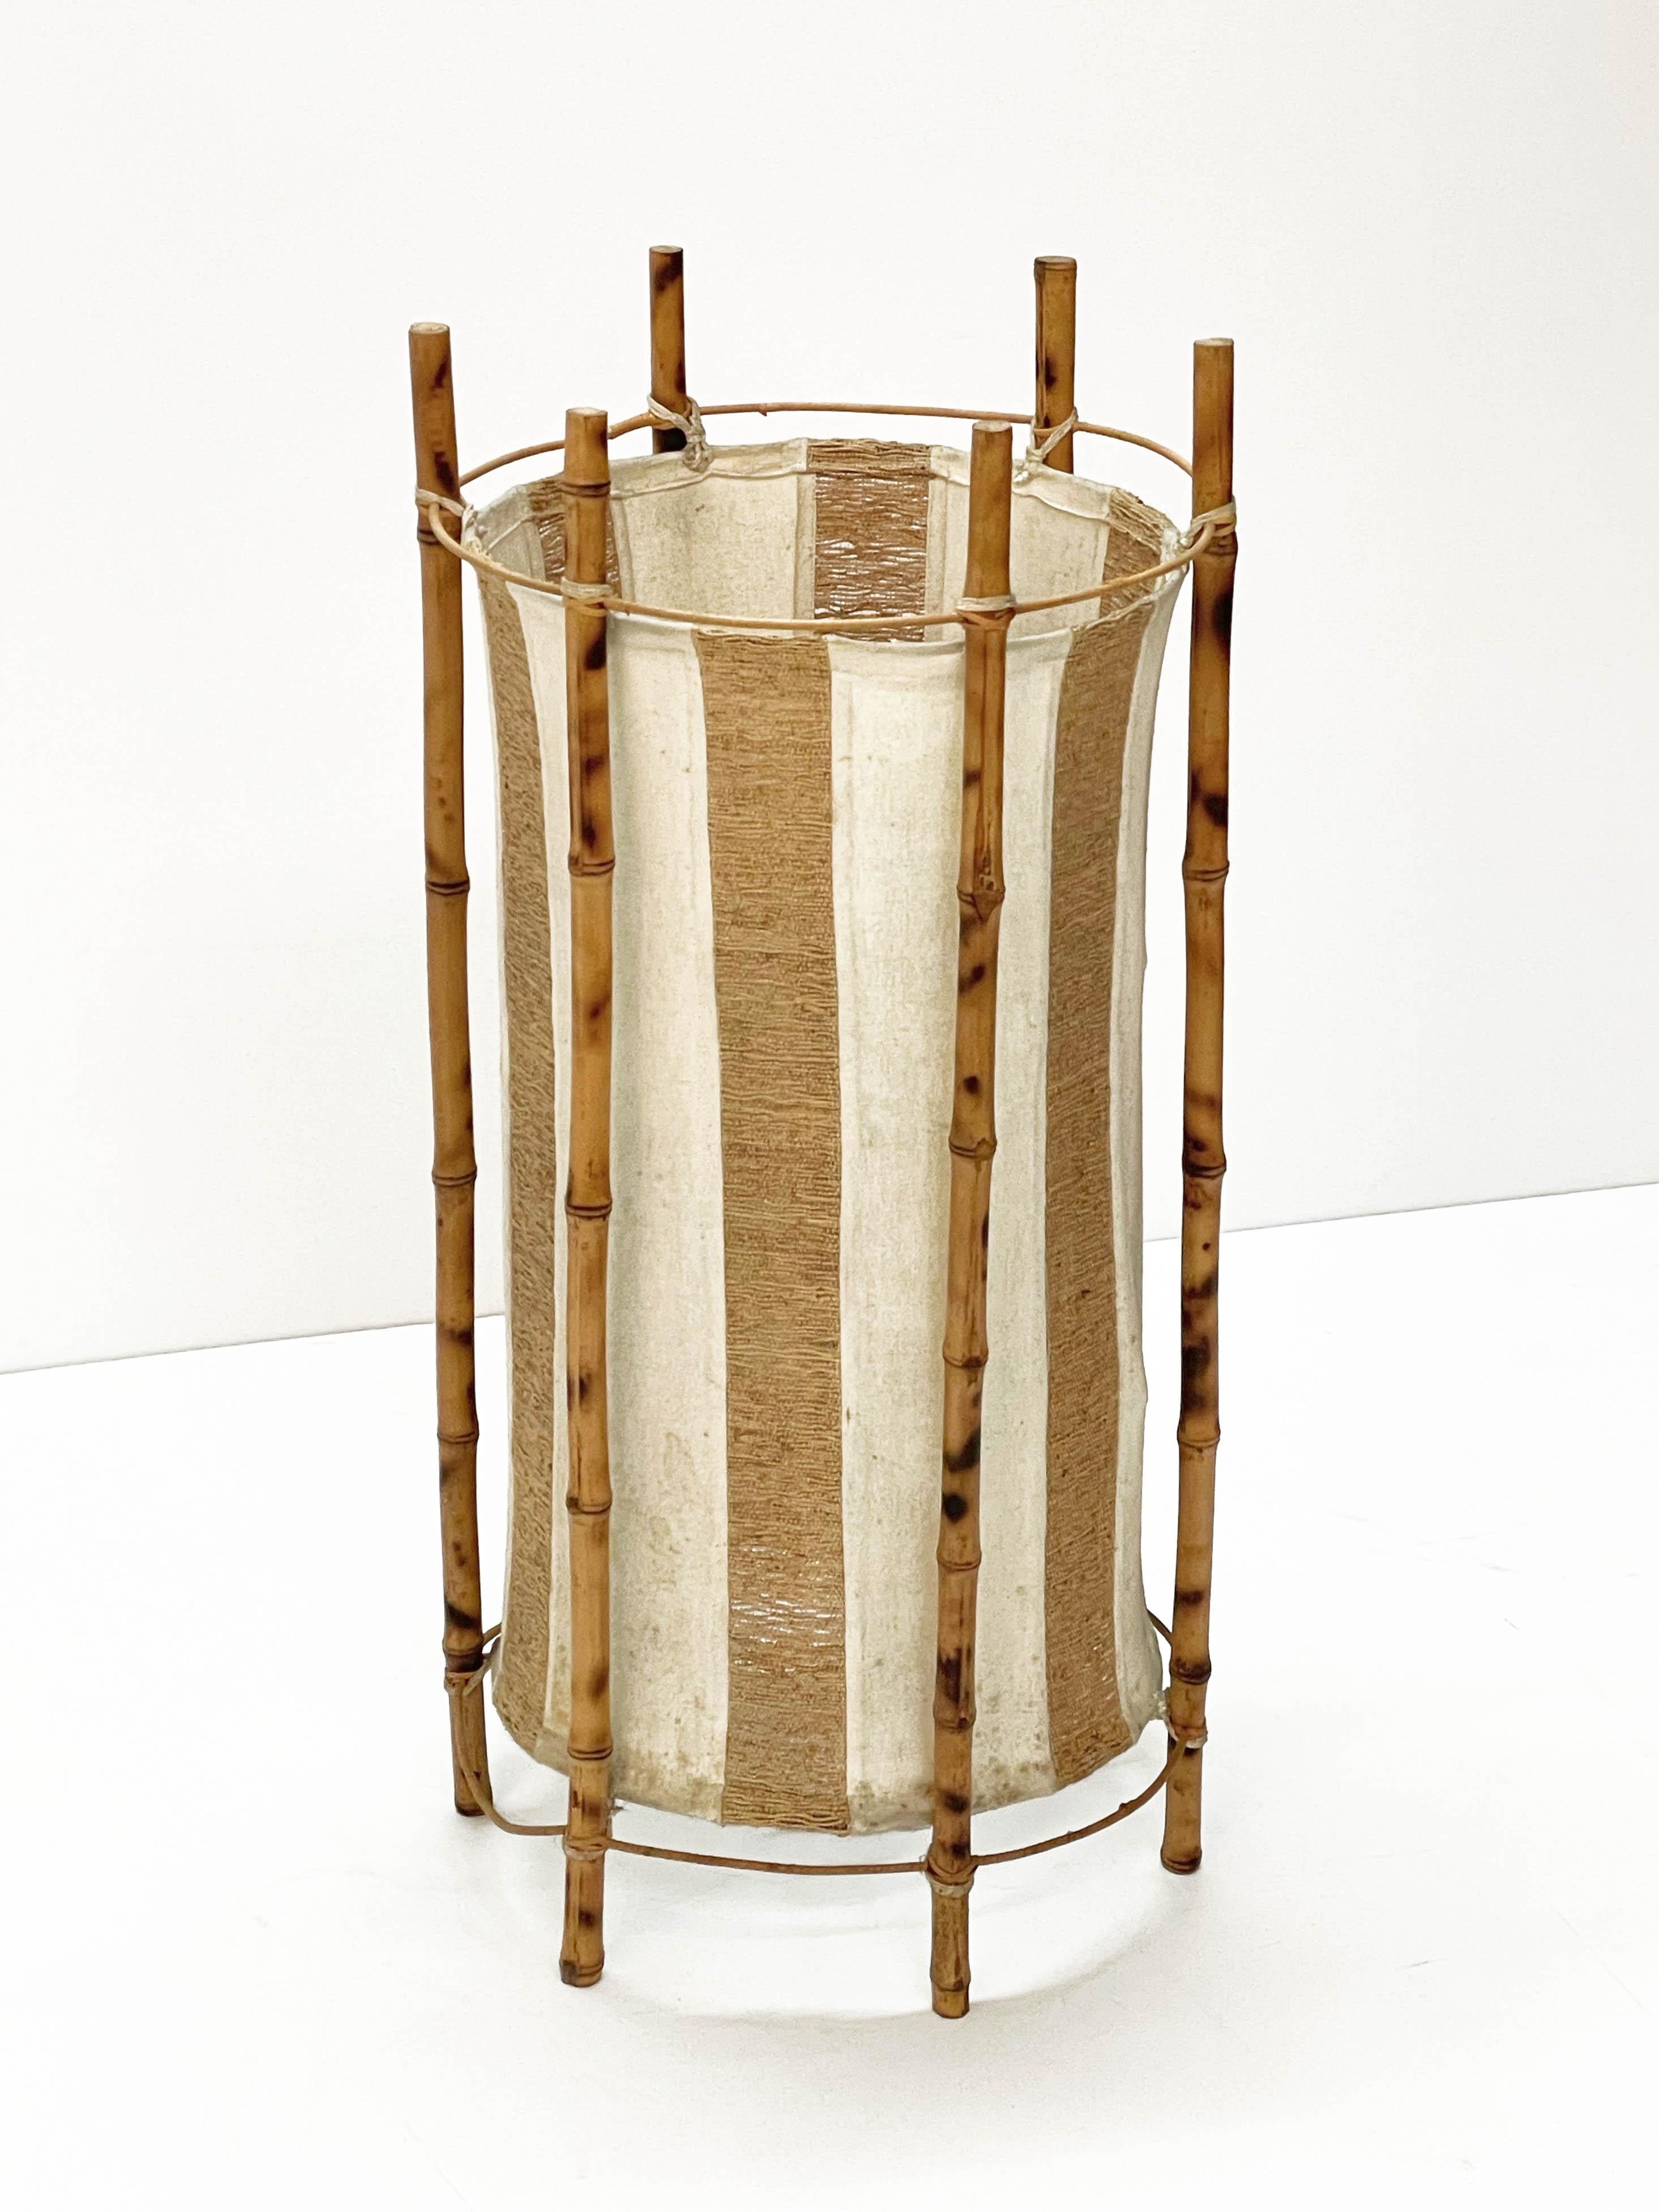 Fabric Louis Sognot Midcentury Cotton, Bamboo and Rattan Italian Floor Lamp, 1950s For Sale